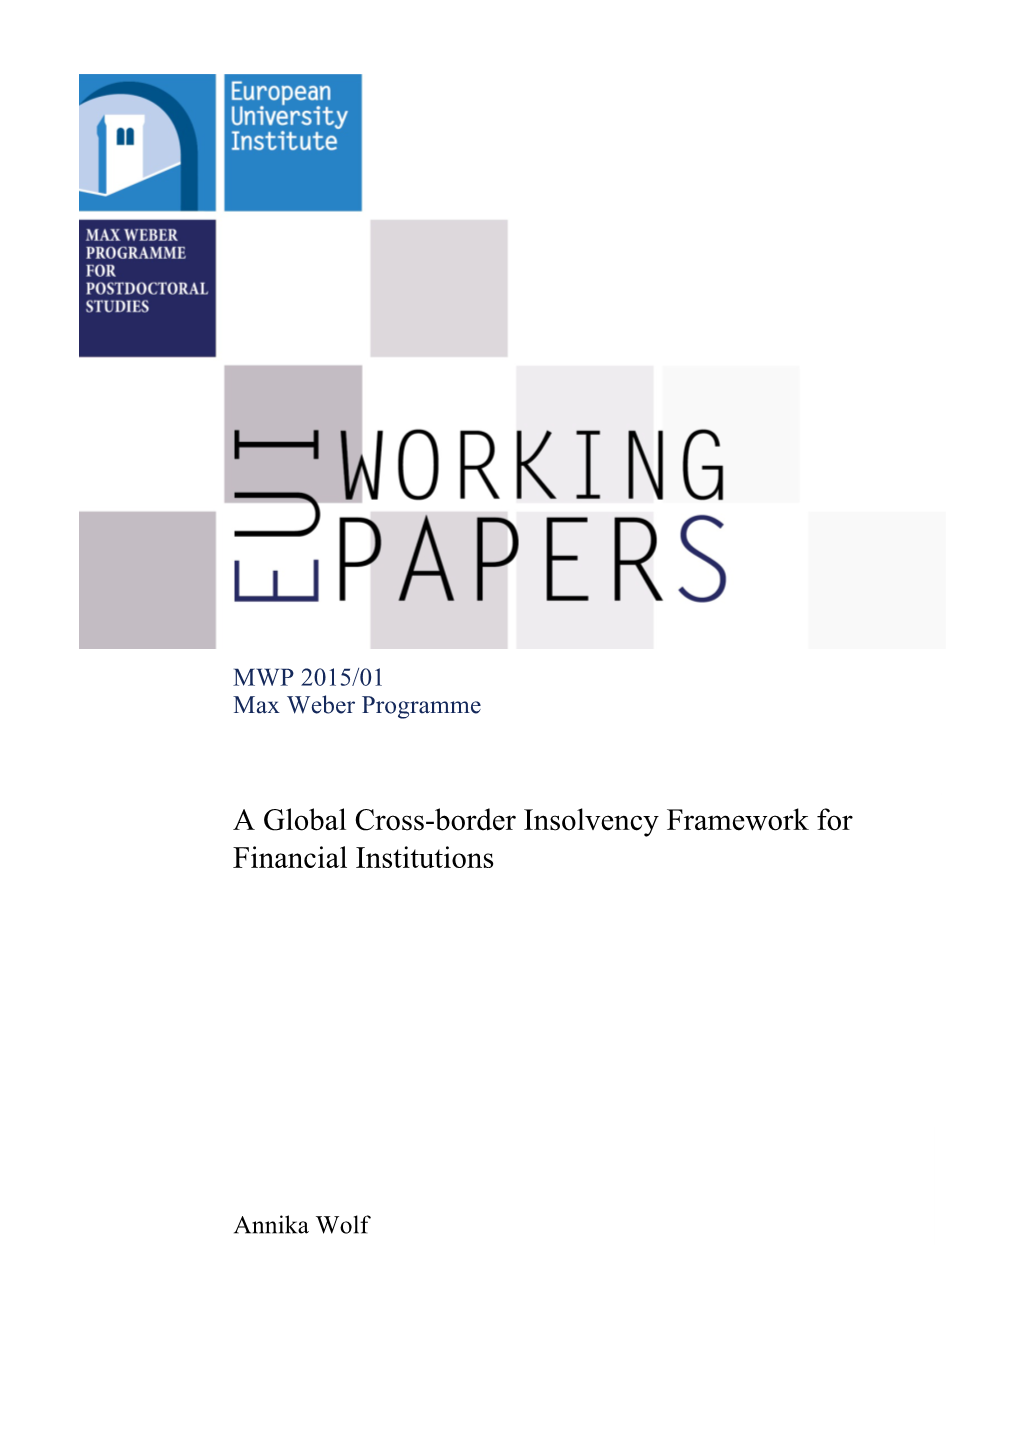 A Global Cross-Border Insolvency Framework for Financial Institutions